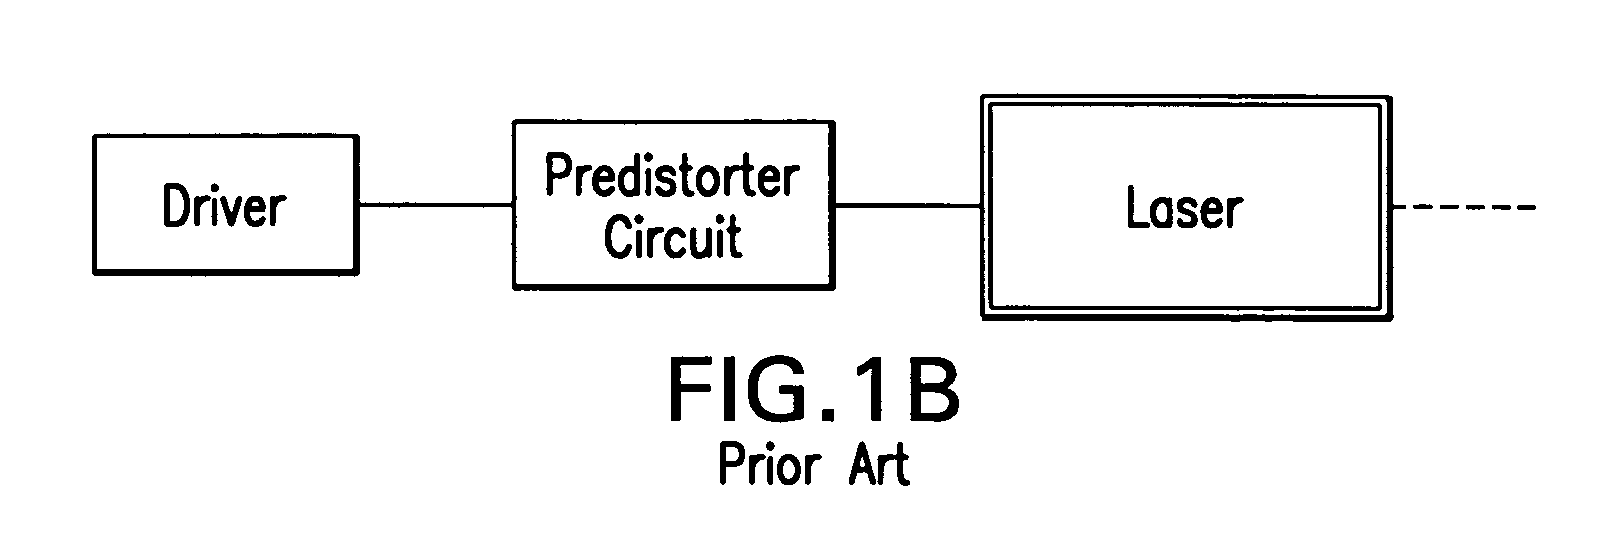 Optical transmitter with integrated amplifier and pre-distortion circuit